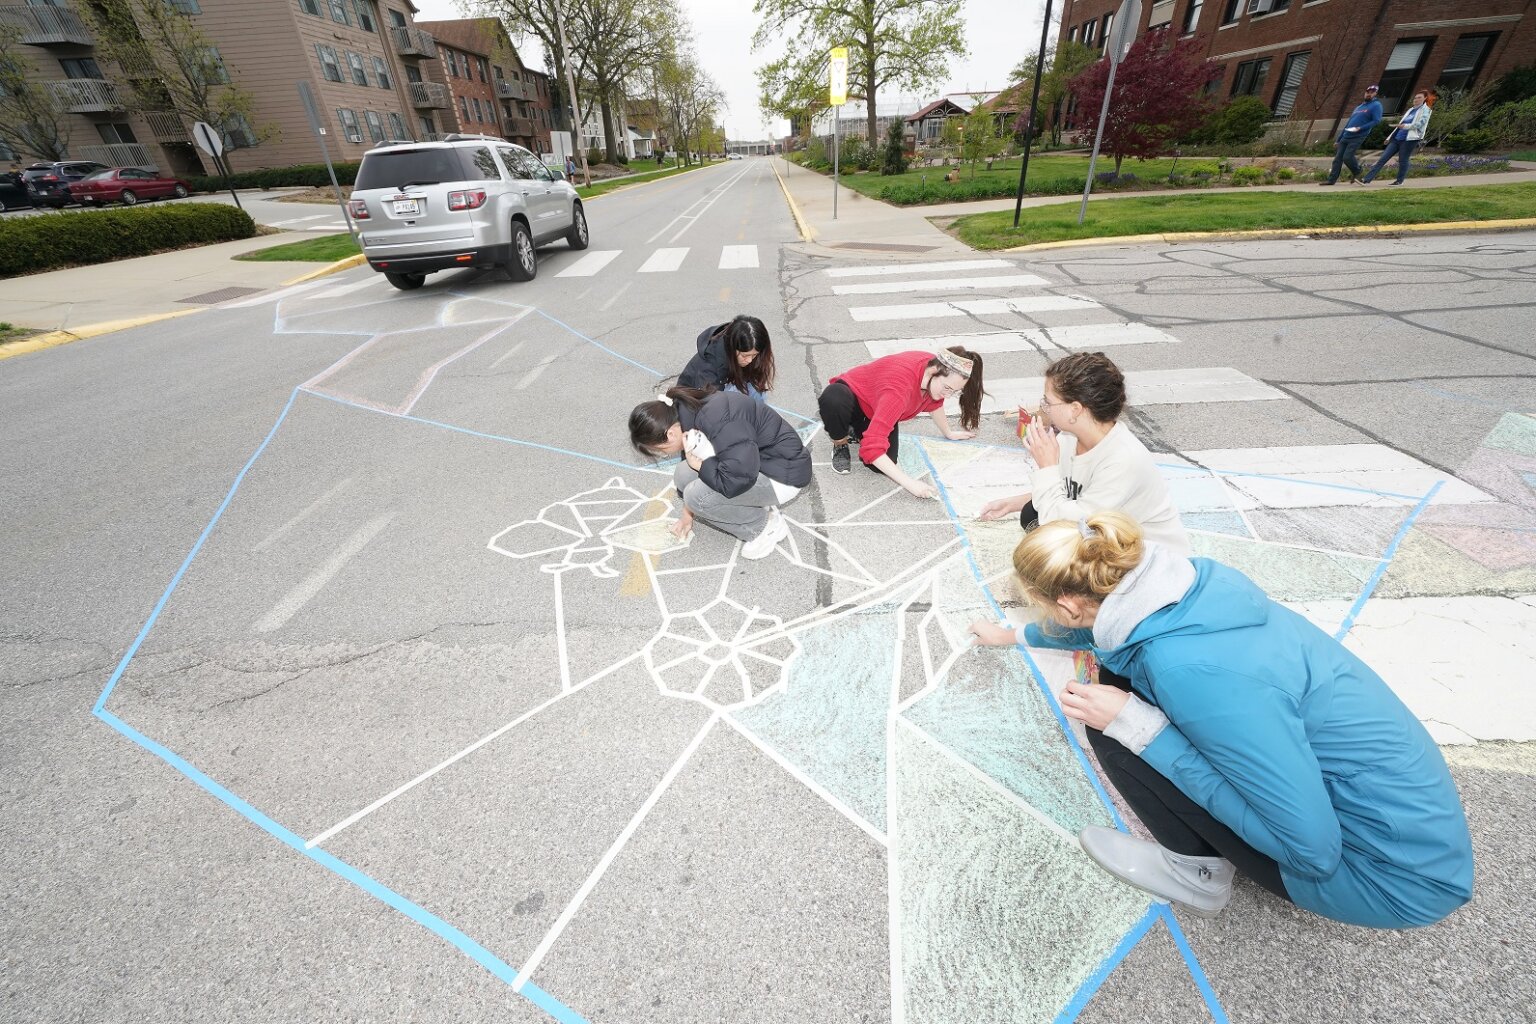 Image of students doing some chalk drawing decoration on the street